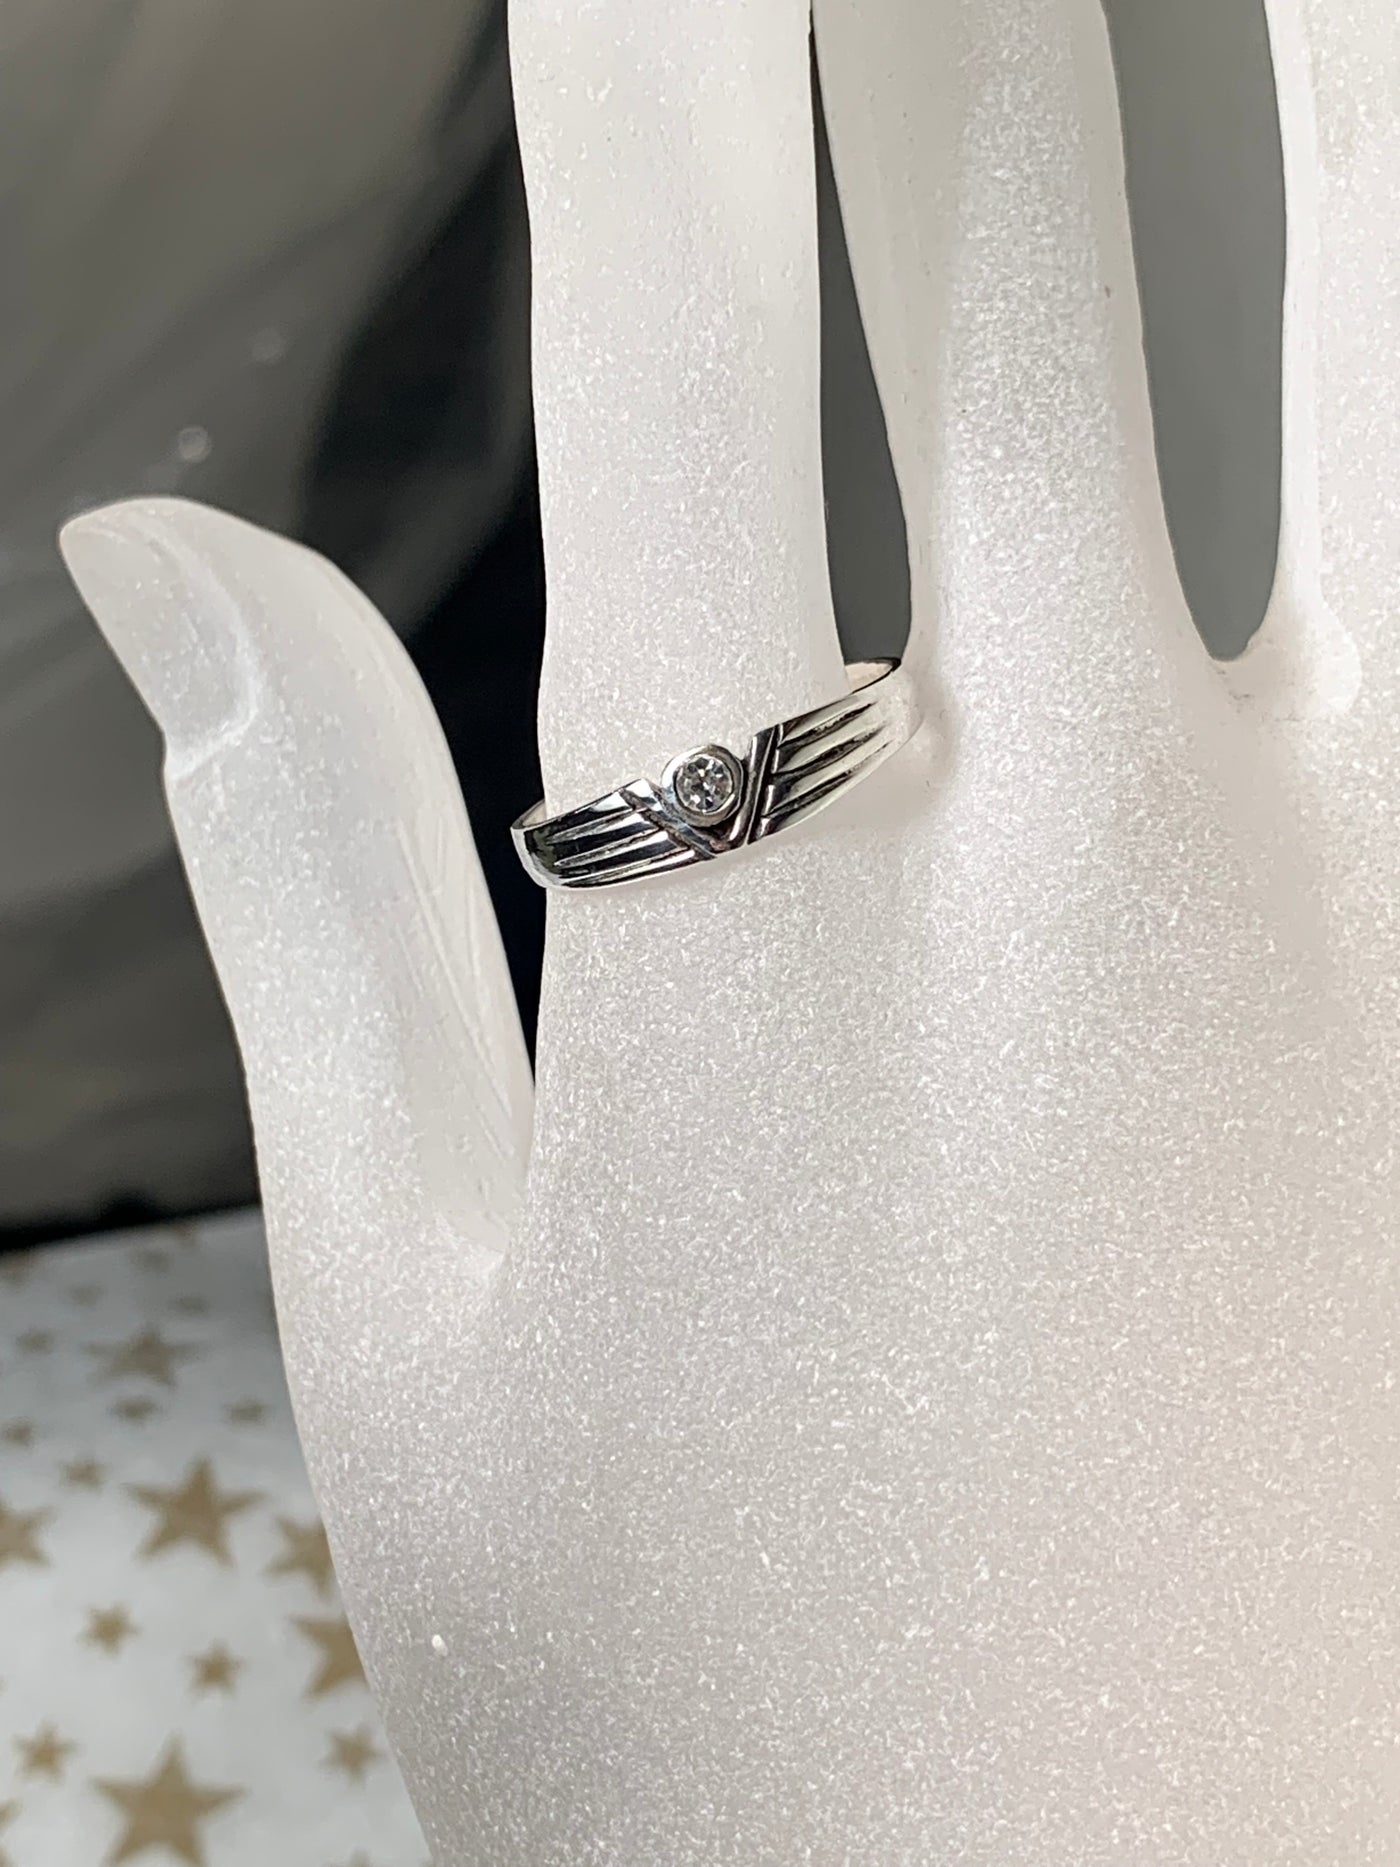 Sterling Silver & Cubic Zirconia Ring